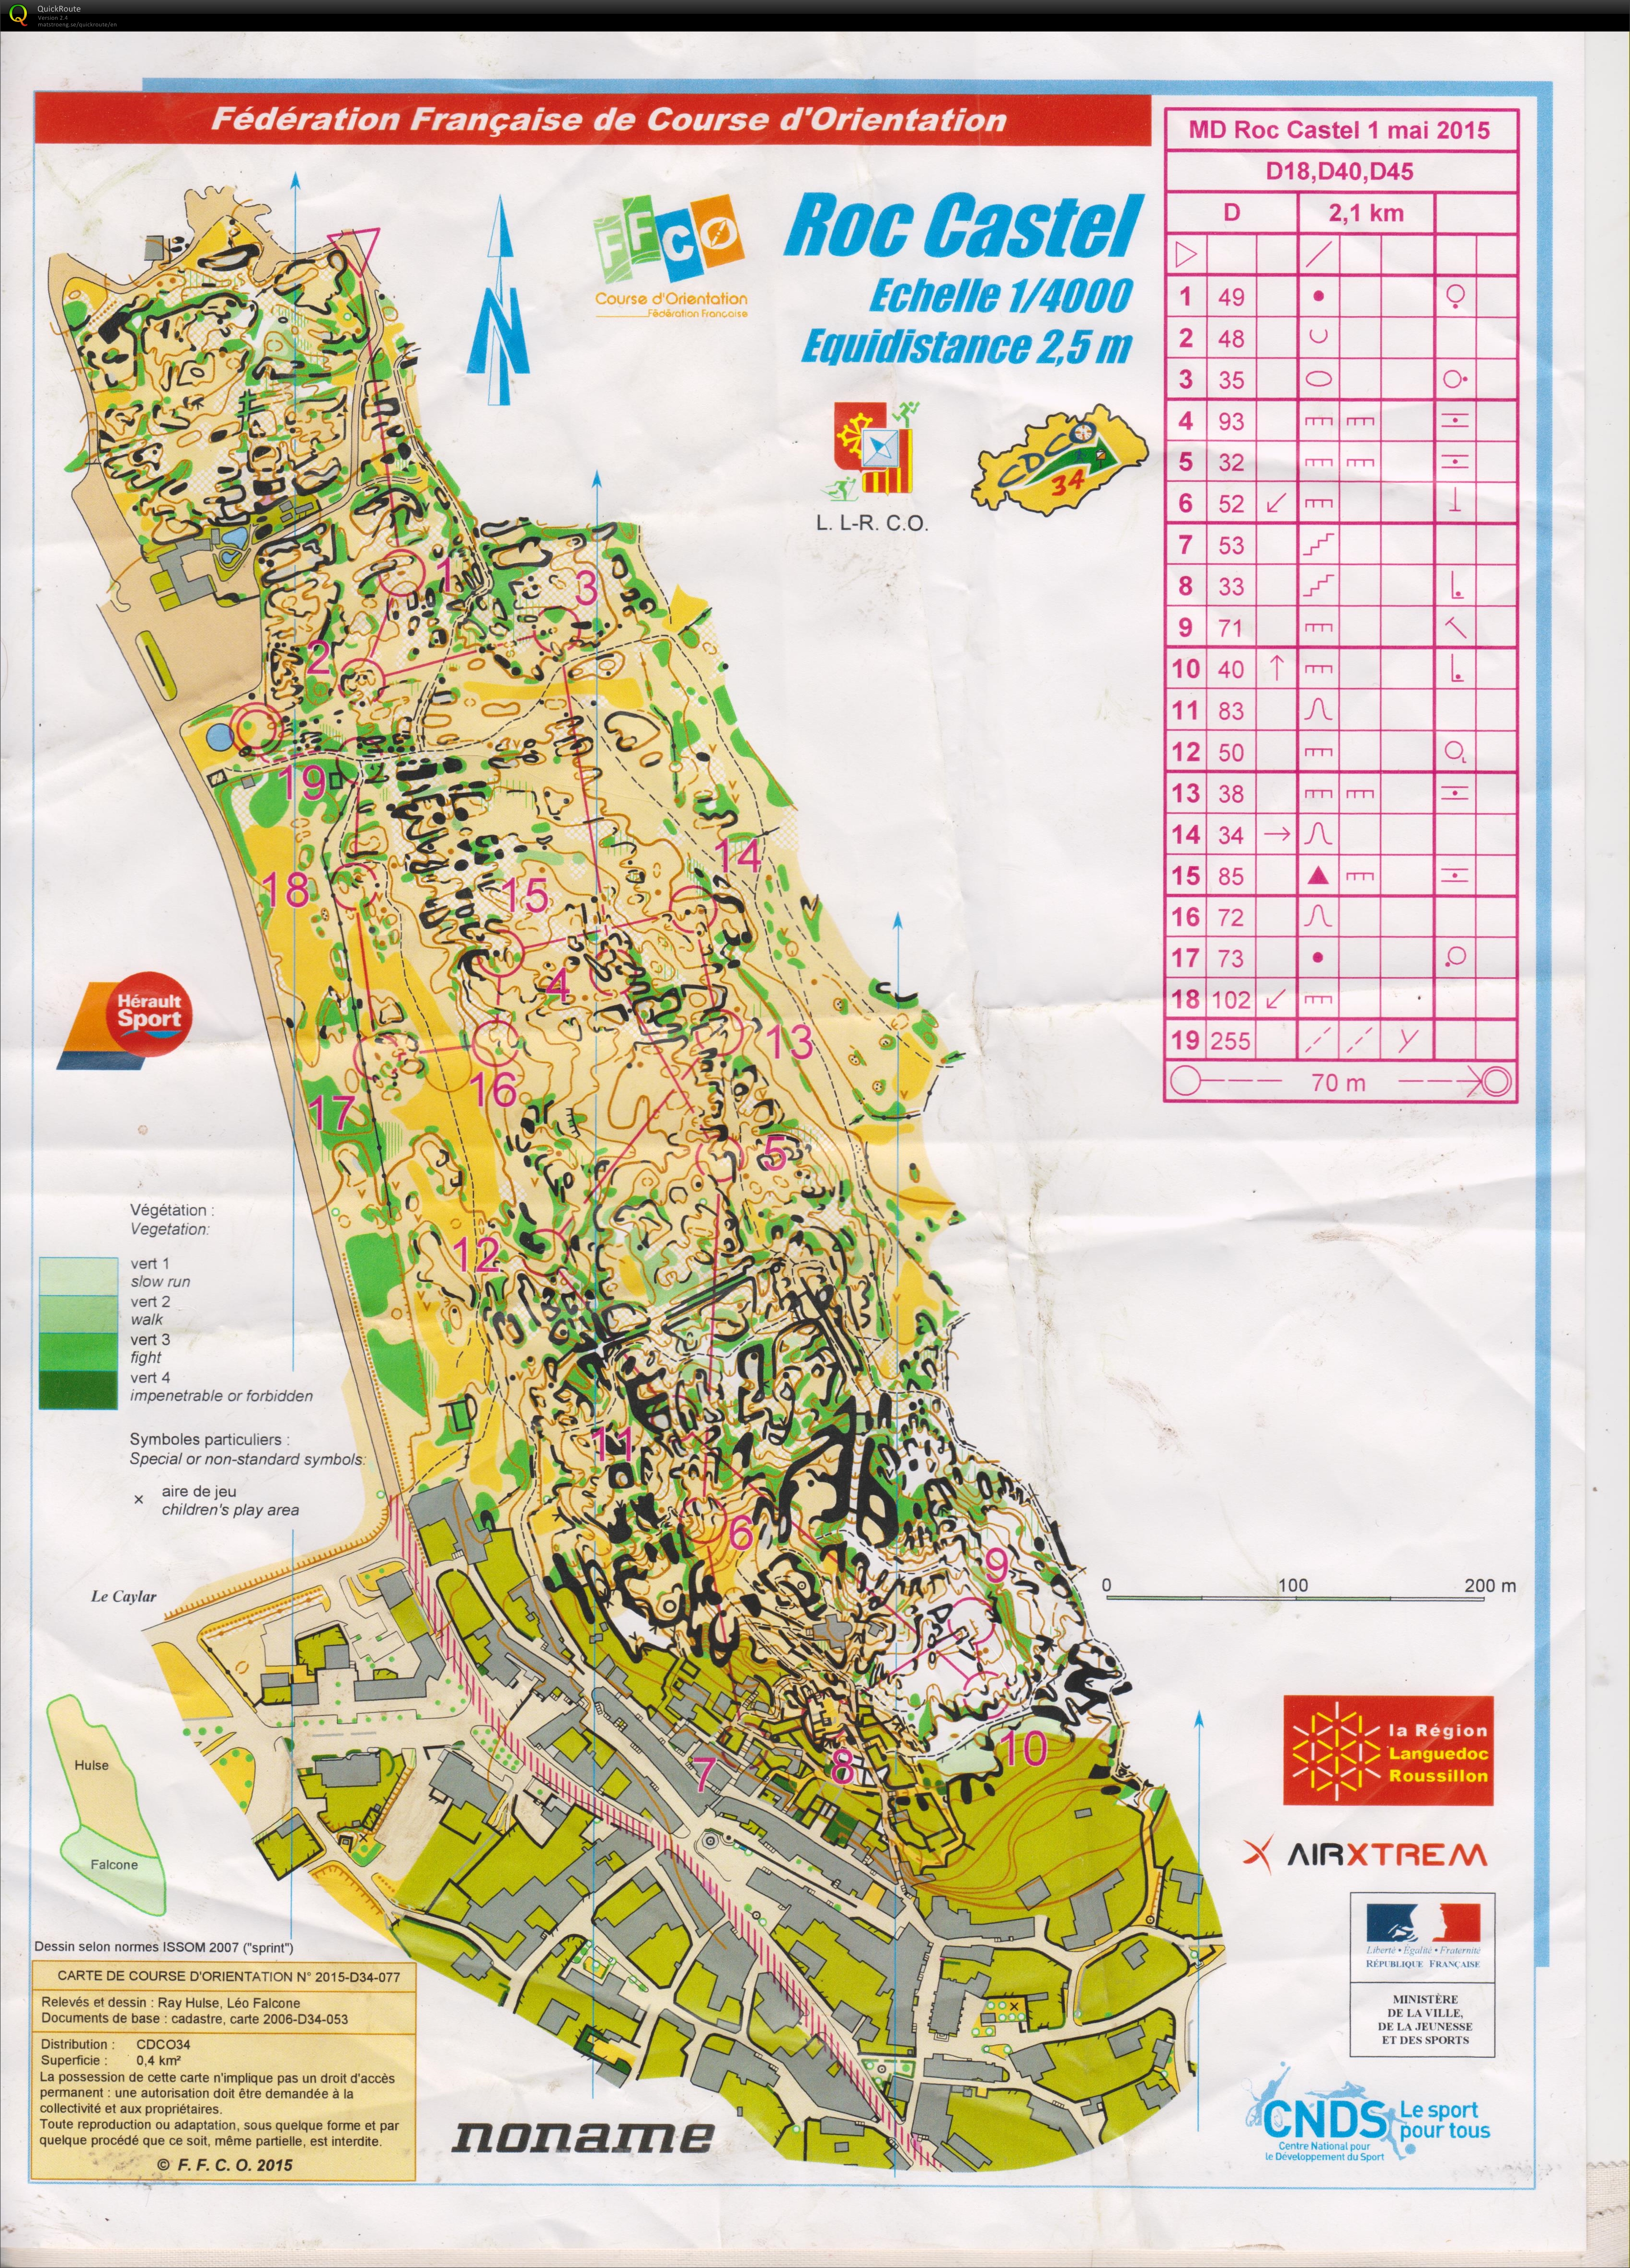 Nationale SO Larzac D18 - Day 1 - Le Caylar (01-05-2015)